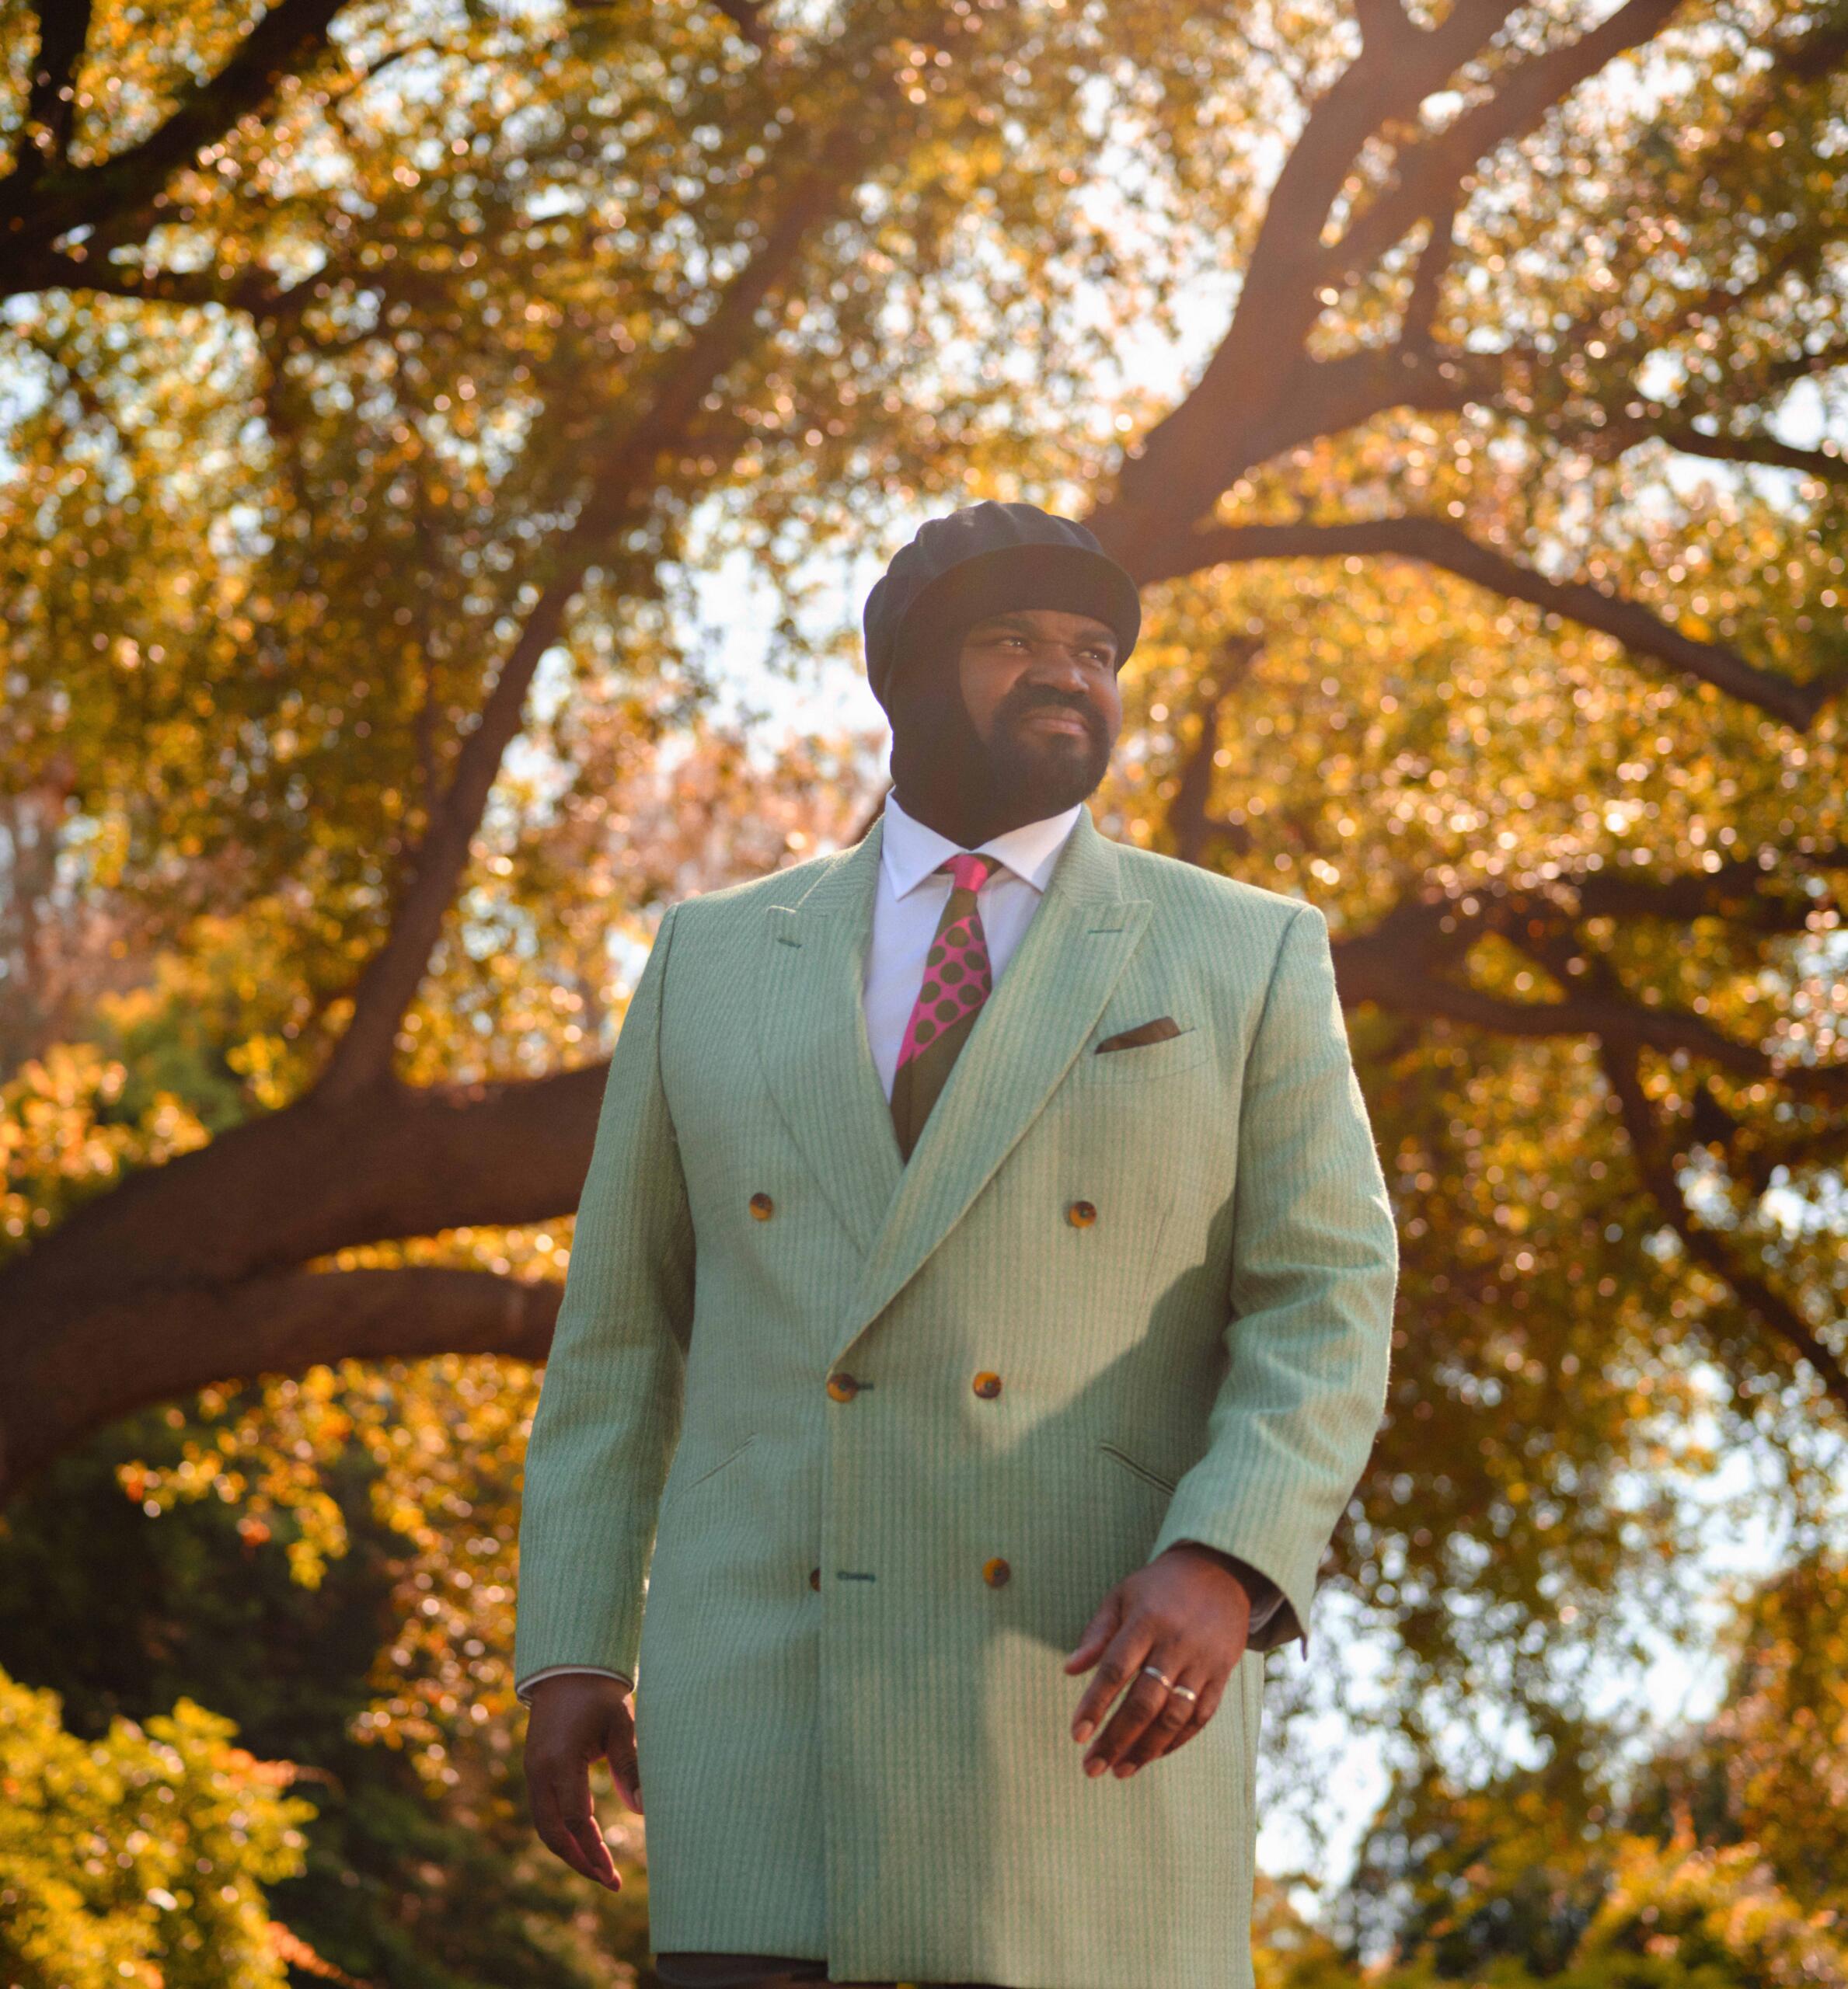 Portrait of the singer Gregory Porter. He is wearing a suit and standing in front of a large deciduous tree.